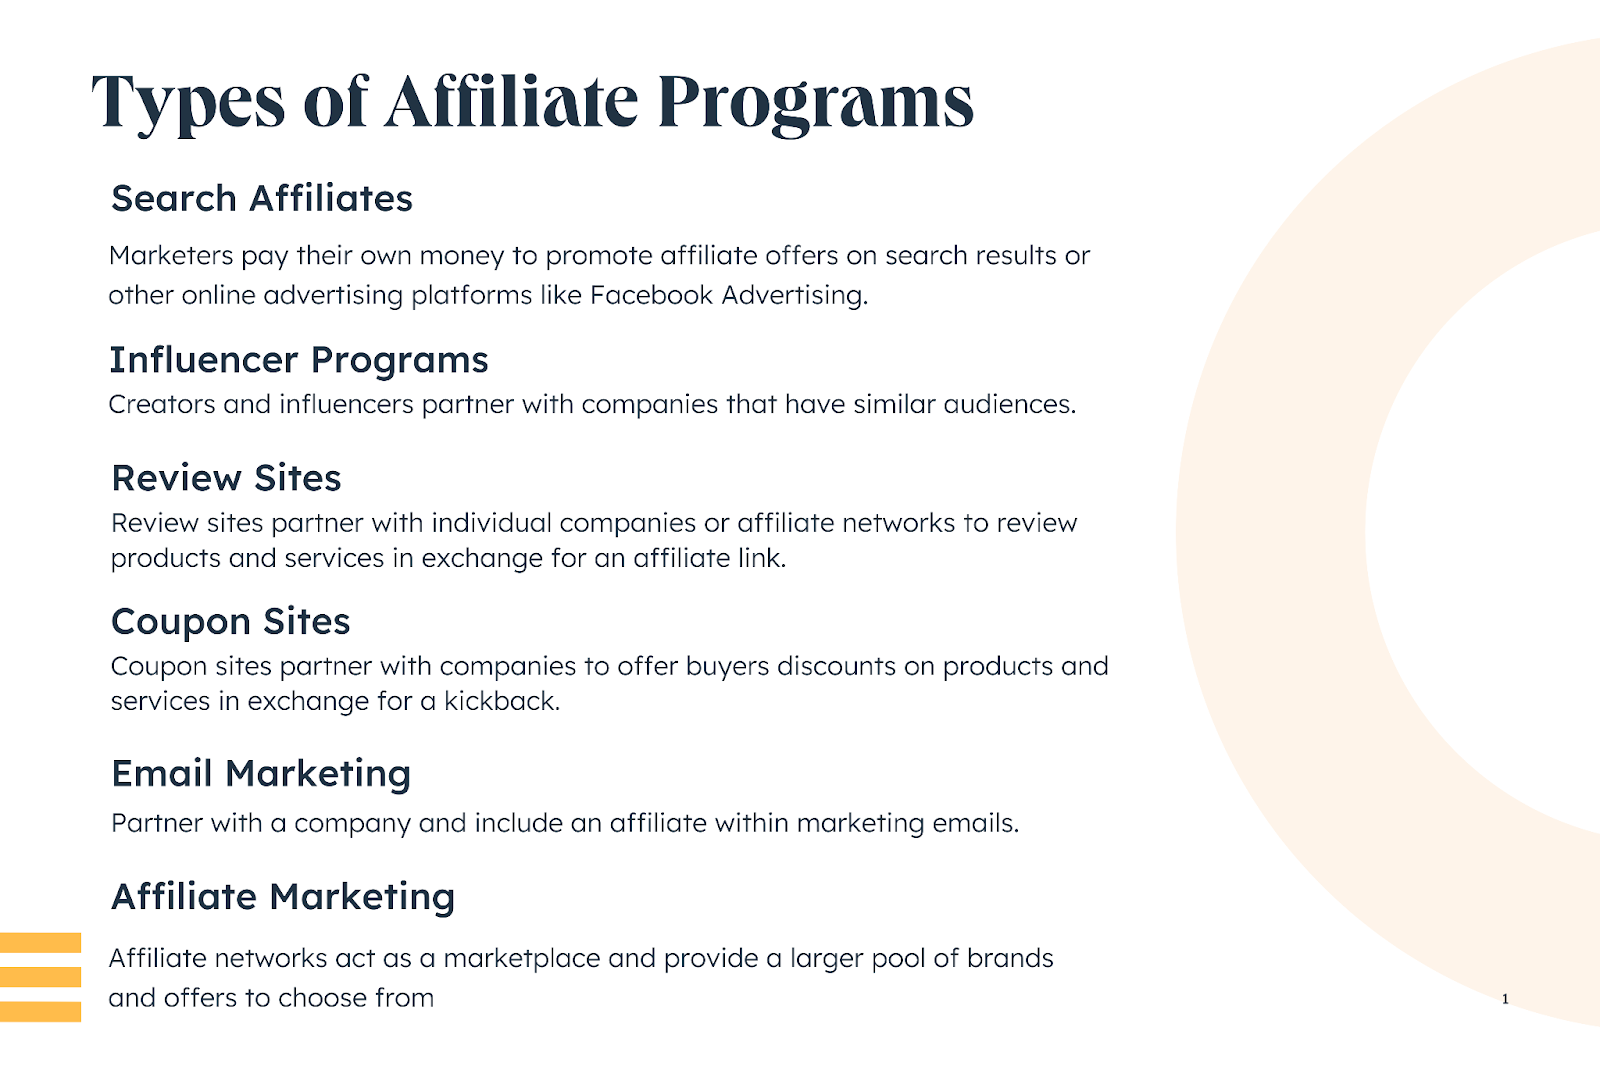 Top 10 Affiliate Programs to Increase Your Revenue in 2018